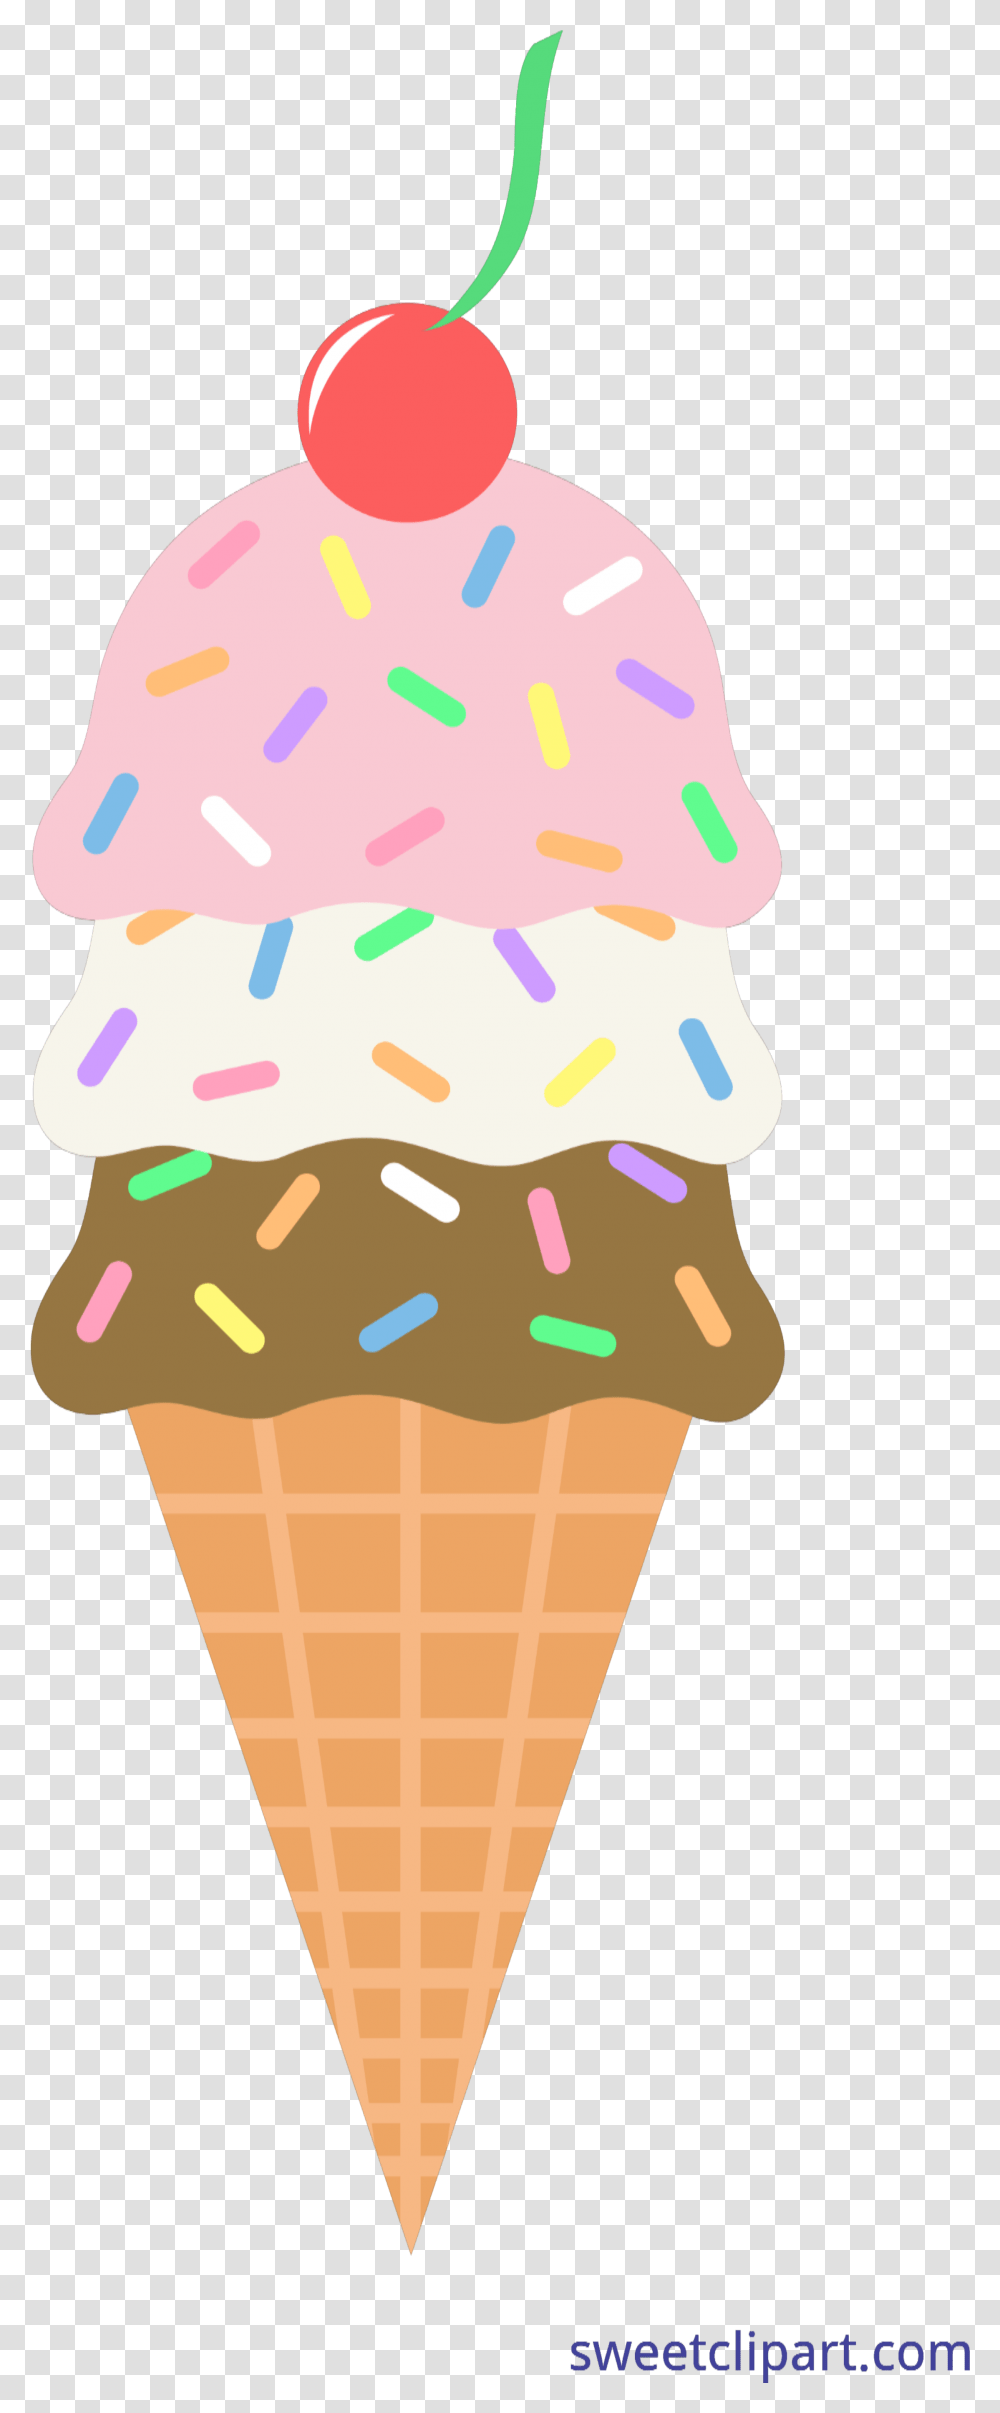 Thumb Image Ice Cream Cone With Sprinkles Clipart, Dessert, Food, Creme, Sweets Transparent Png